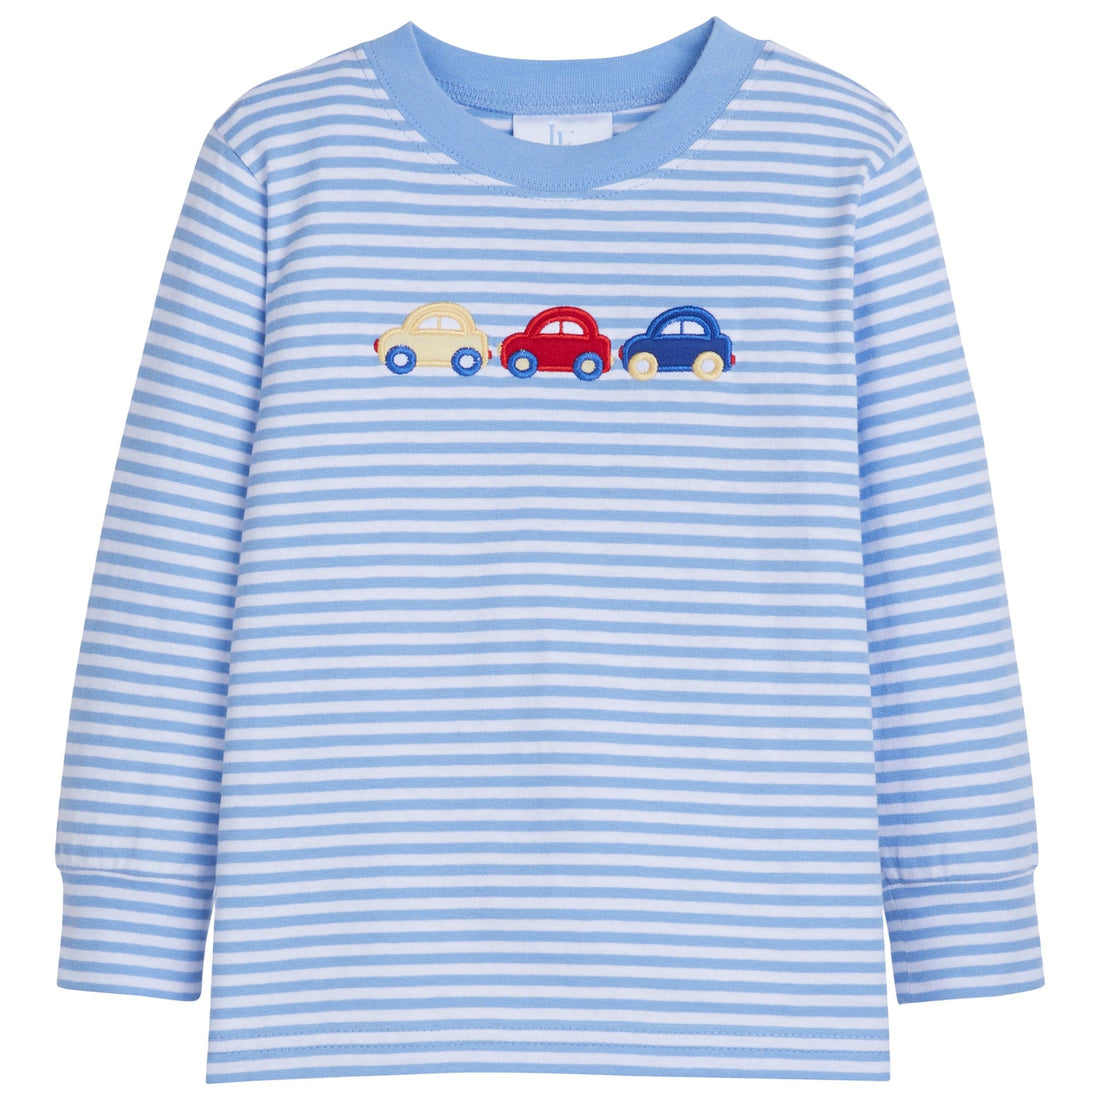 little english classic childrens clothing boys long sleeved light blue striped long sleeve t-shirt with applique cars